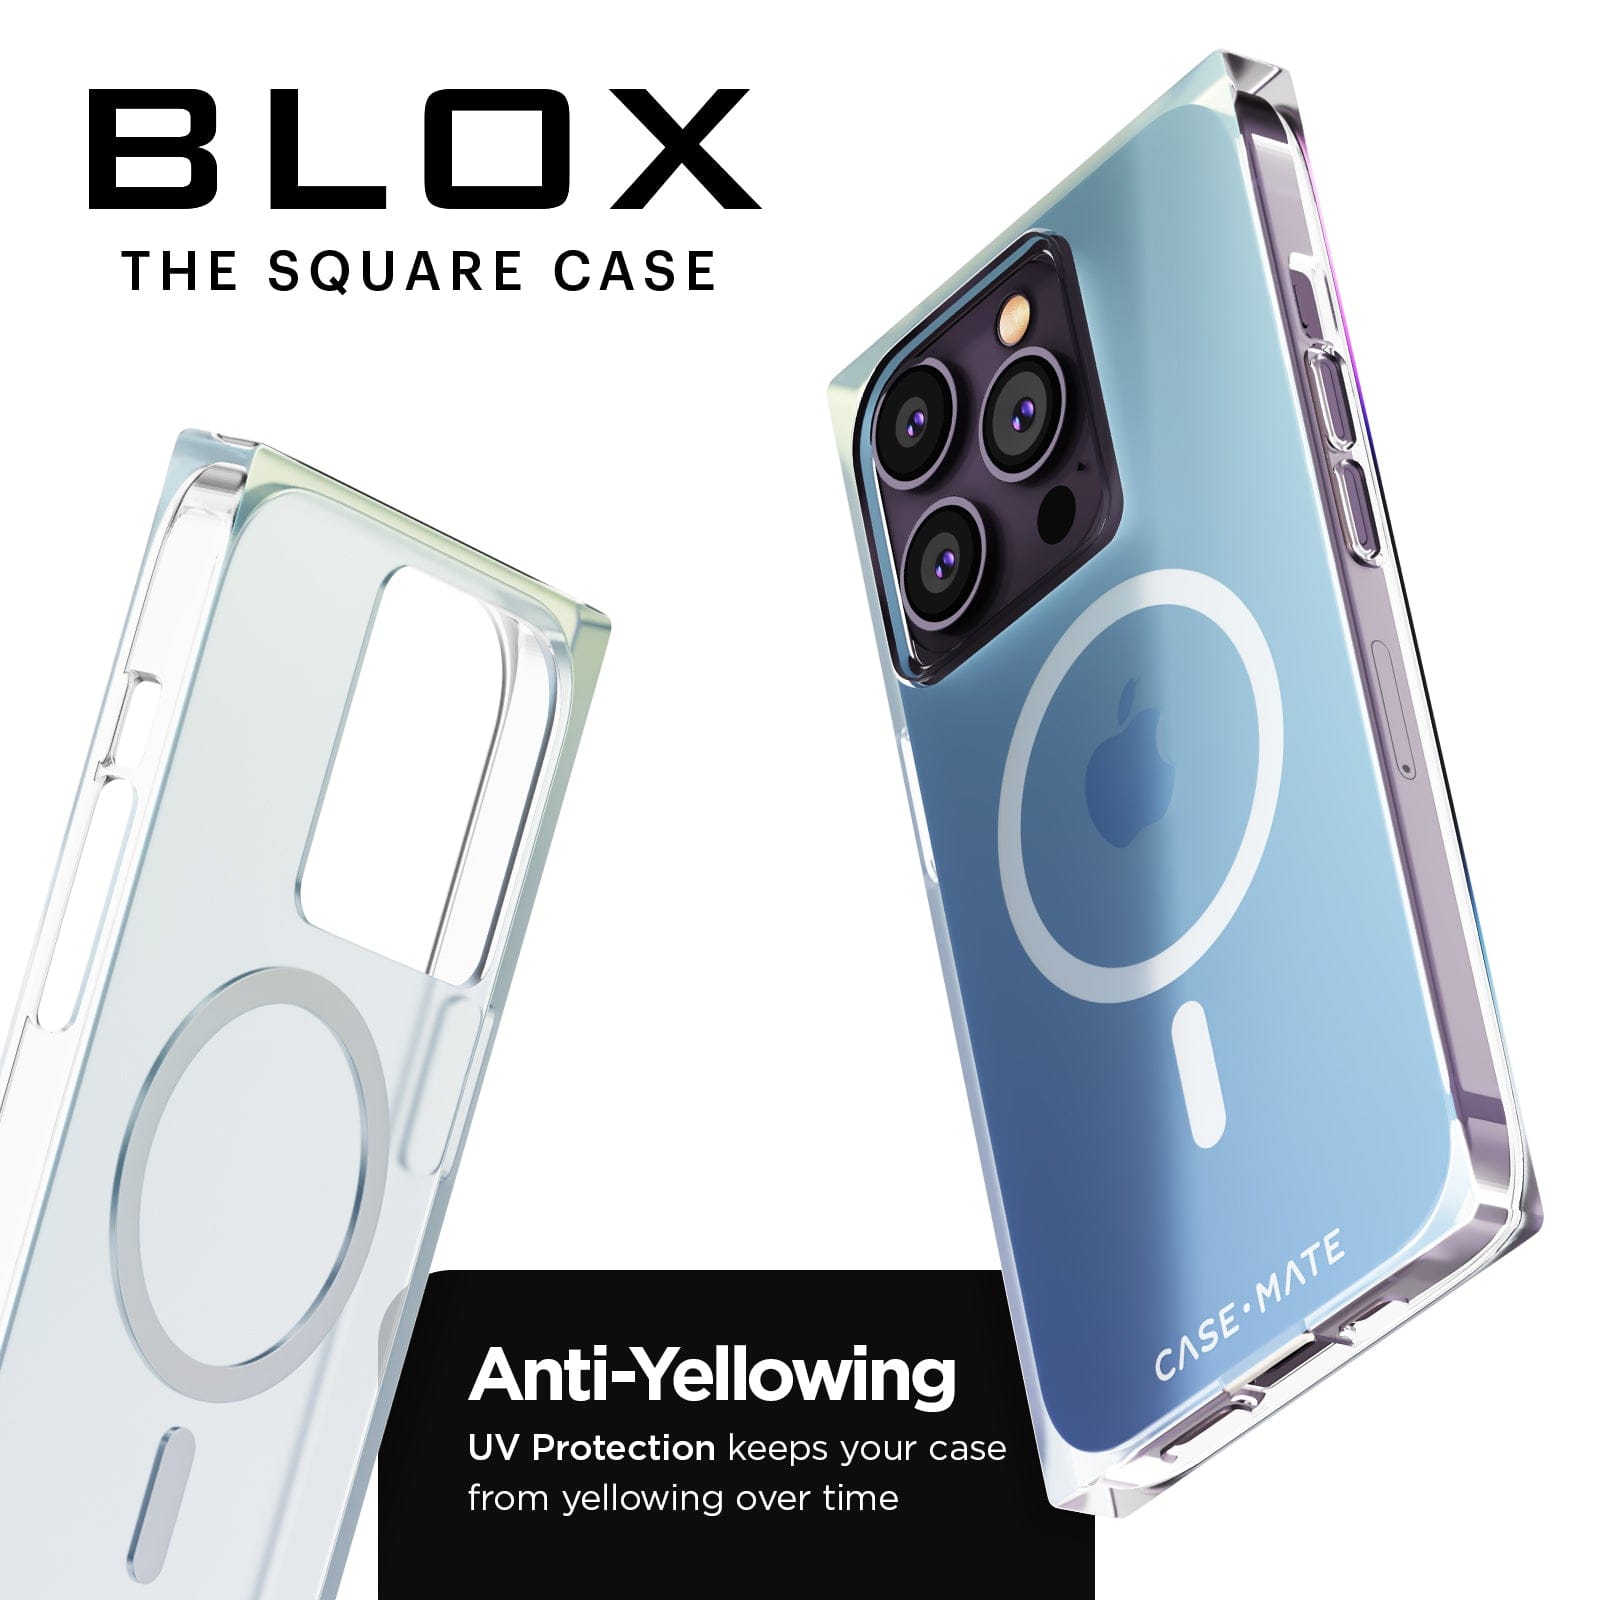 BLOX THE SQUARE CASE. ANTI-YELLOWING UV PROTECTION KEEPS YOUR CASE FROM YELLOWING OVER TIME. 